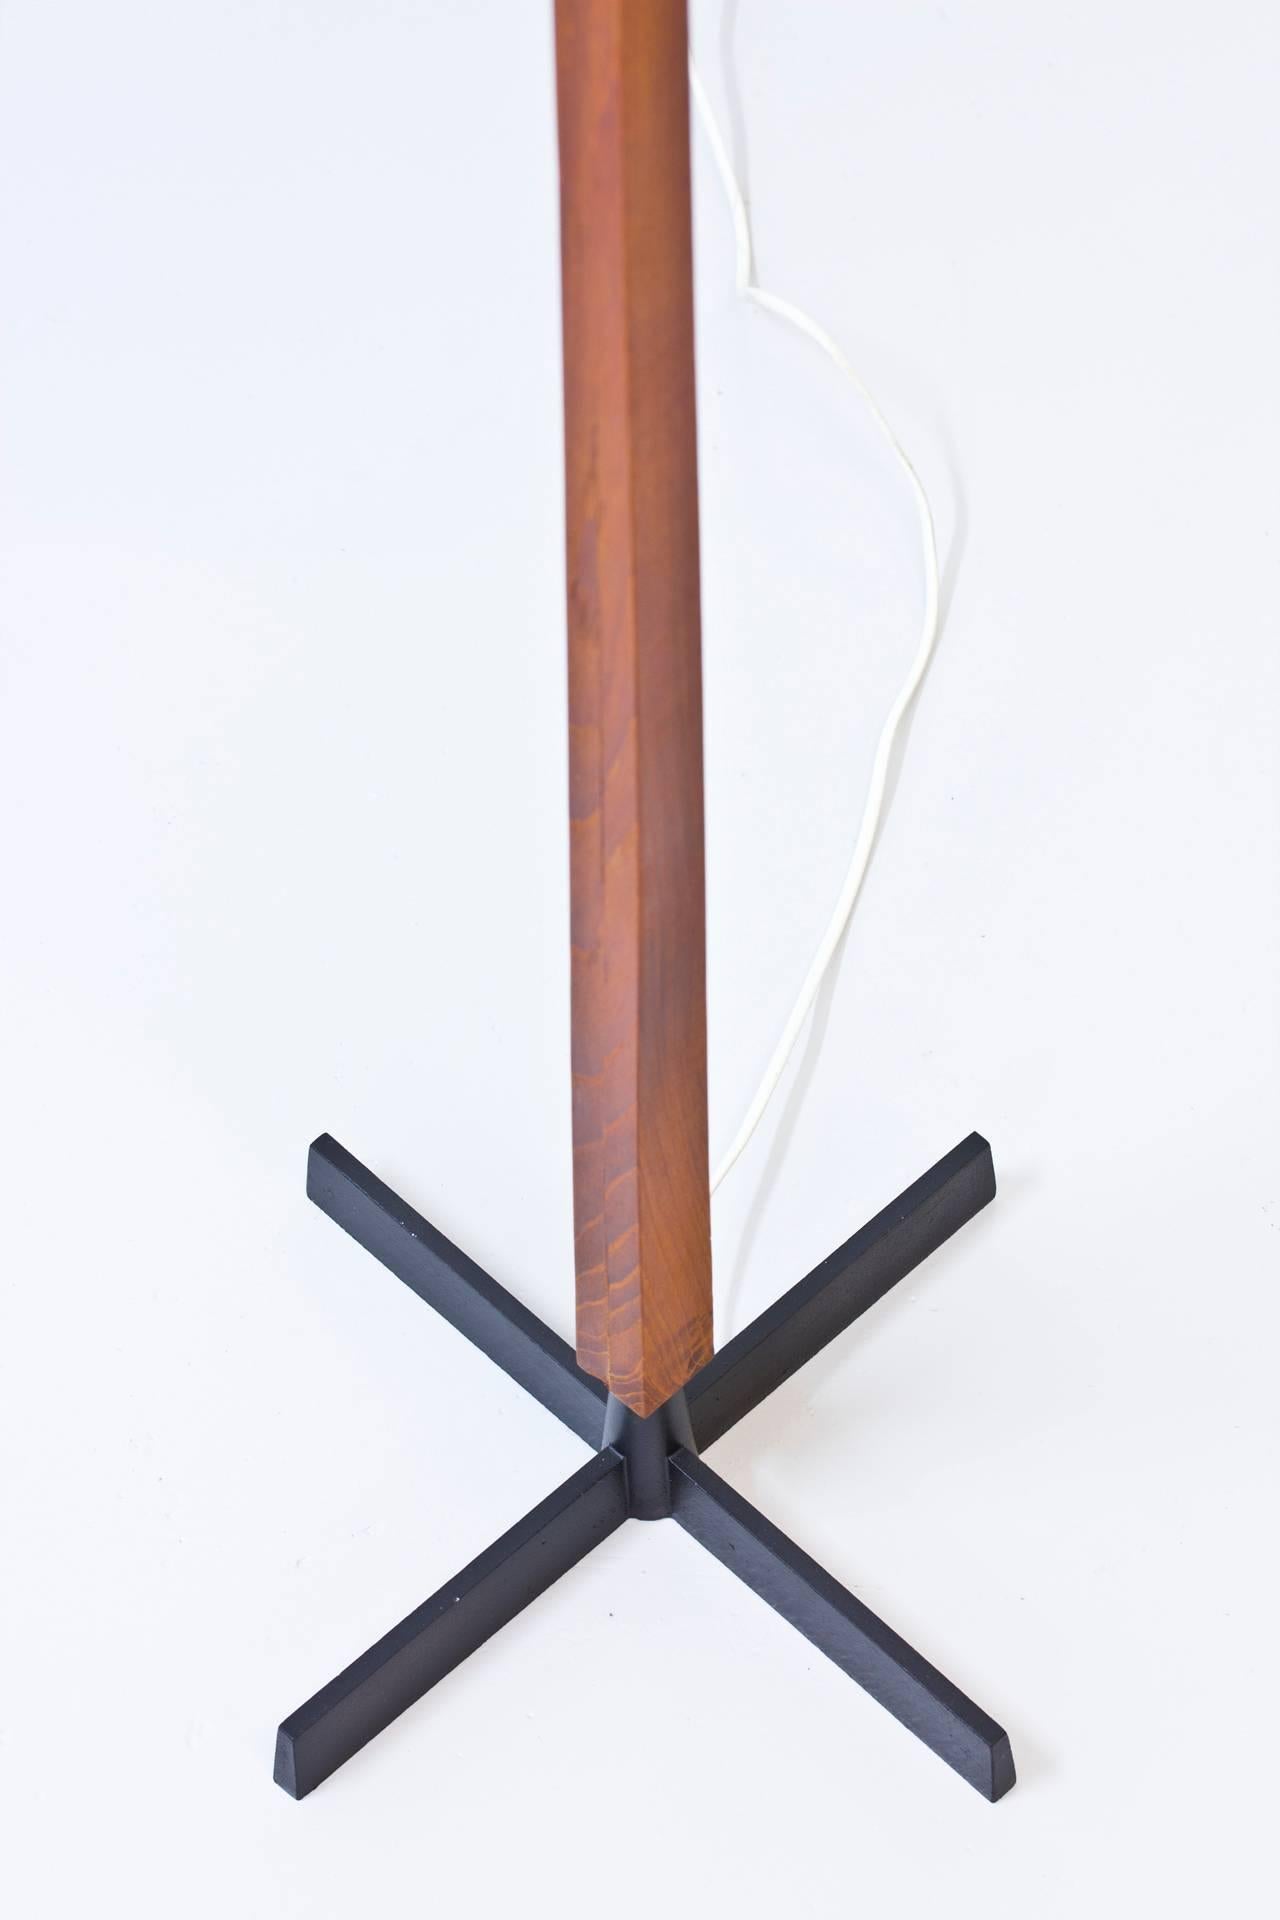 Very rare floor lamp designed by Svend Aage Holm Sorensen for his own company. Produced in Denmark in the 1950s. Solid square teak stem with iron base and original spray plastic shade. Light switch on lamp fitting.
   